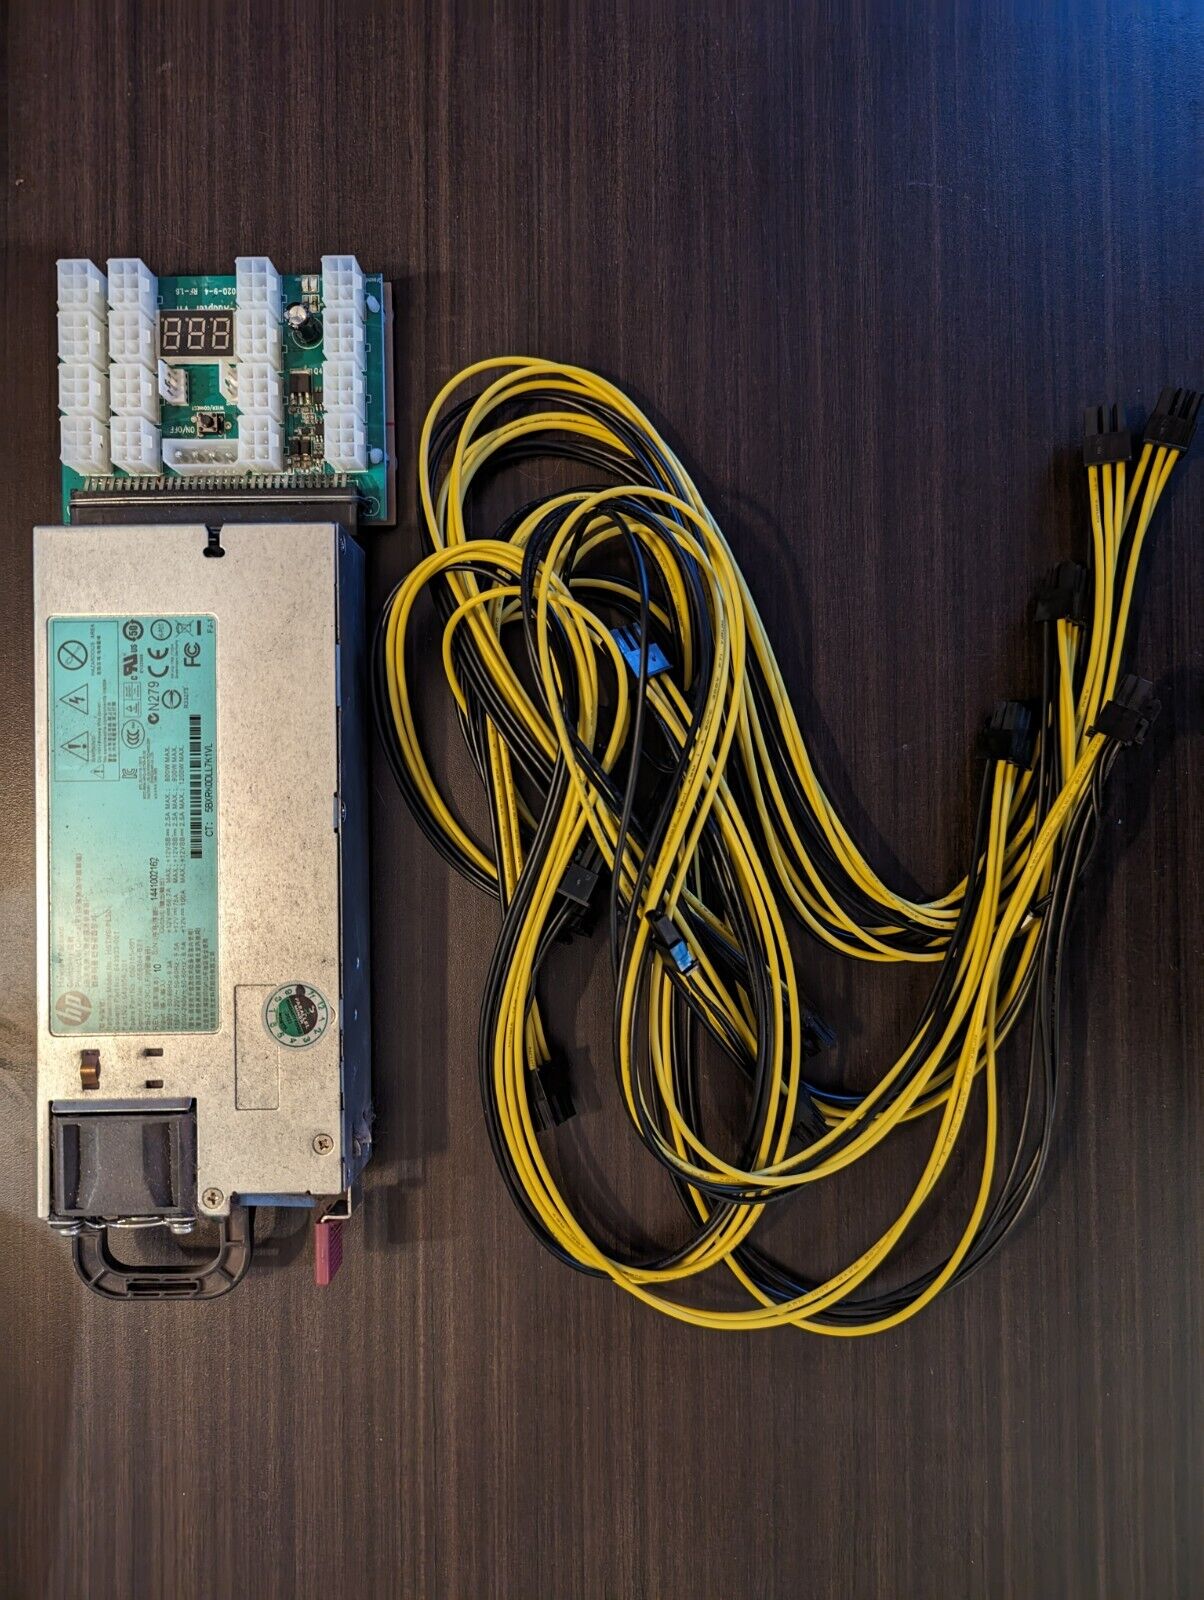 HP Server PSU Power Supply with Breakout Board and 6x 6-PIN PCI E connectors